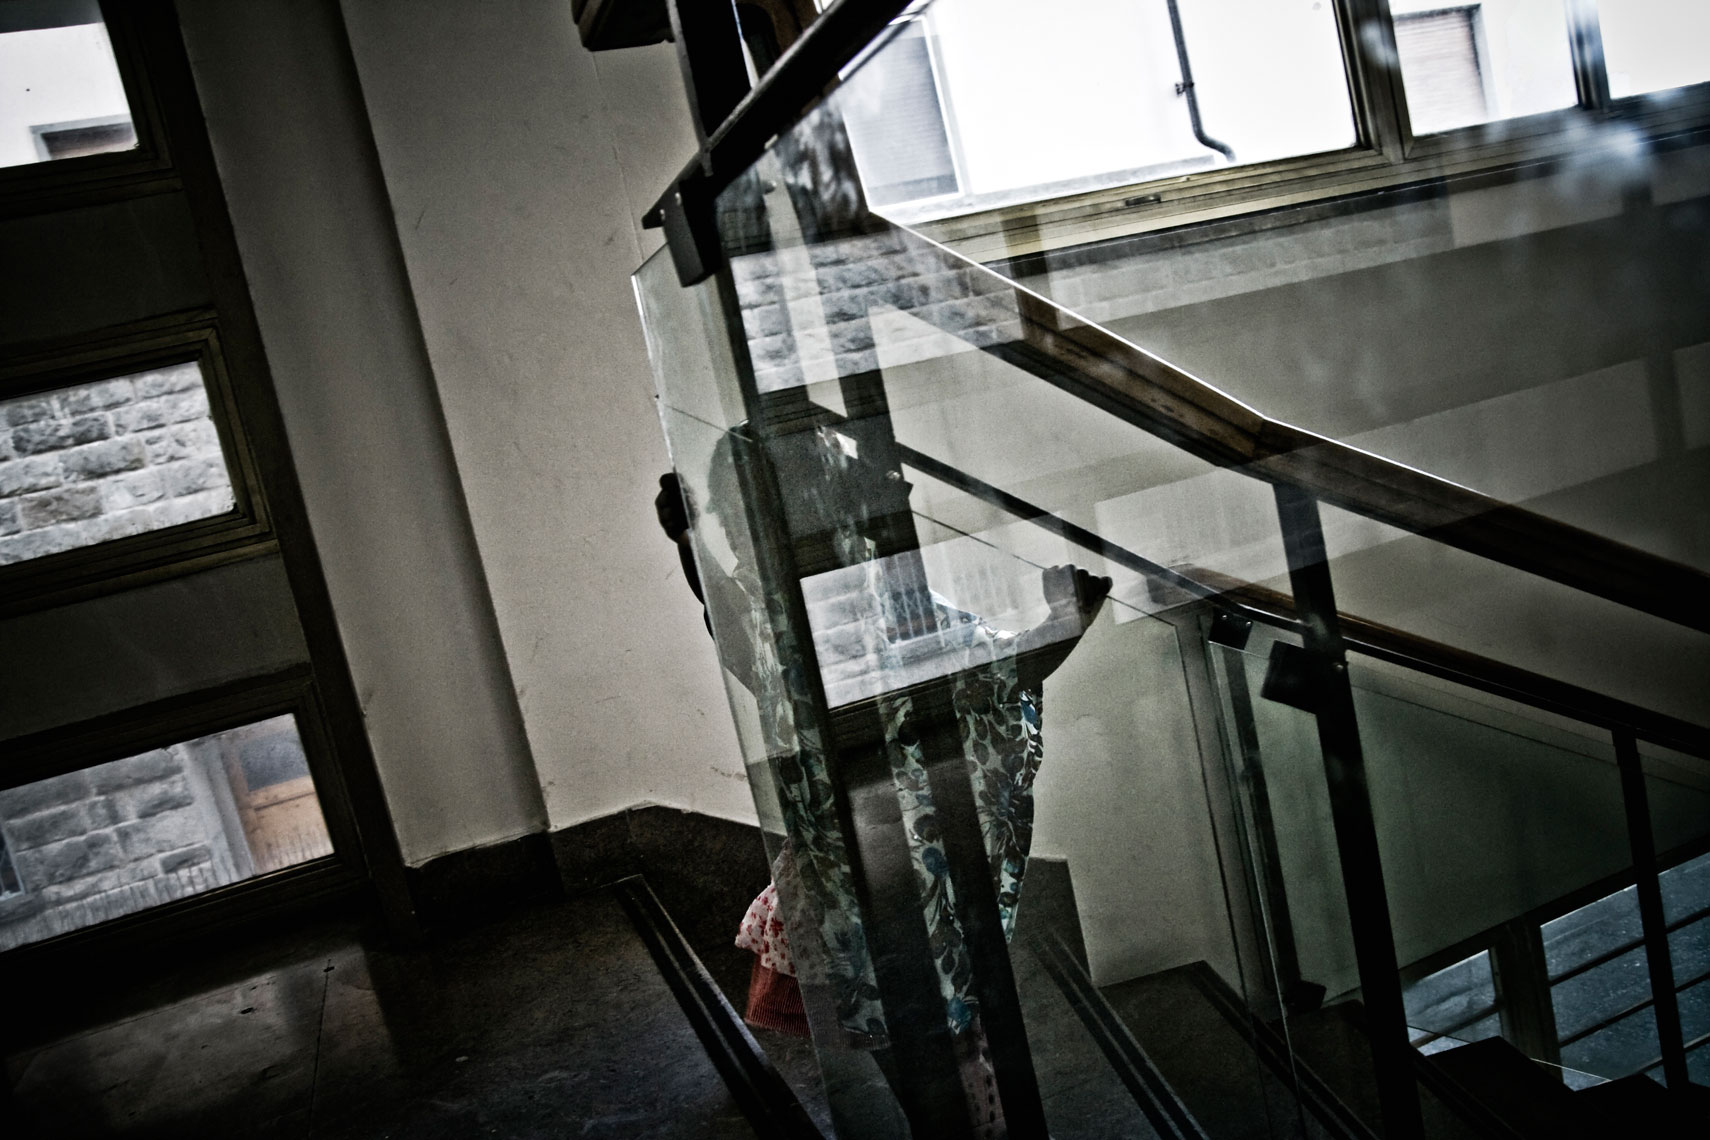 ITALY. Florence, 20th June 2011. A young Somali refugee plays on the stairs of a former office building occupied by Somali and Eritrean refugees.